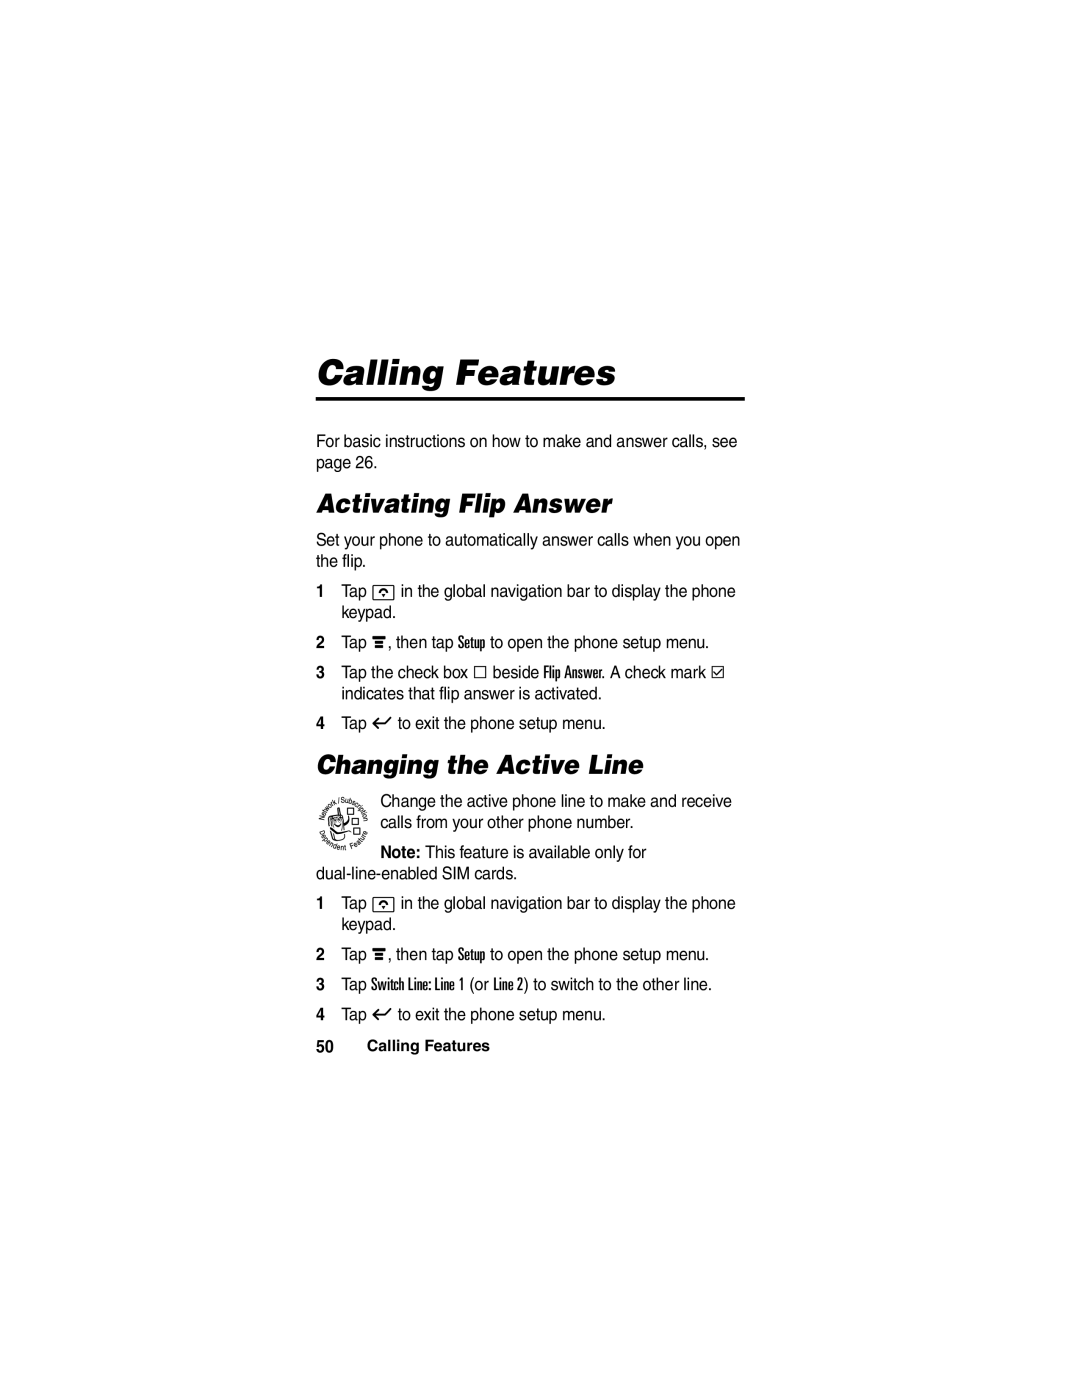 Motorola A780 manual Calling Features, Activating Flip Answer, Changing the Active Line 